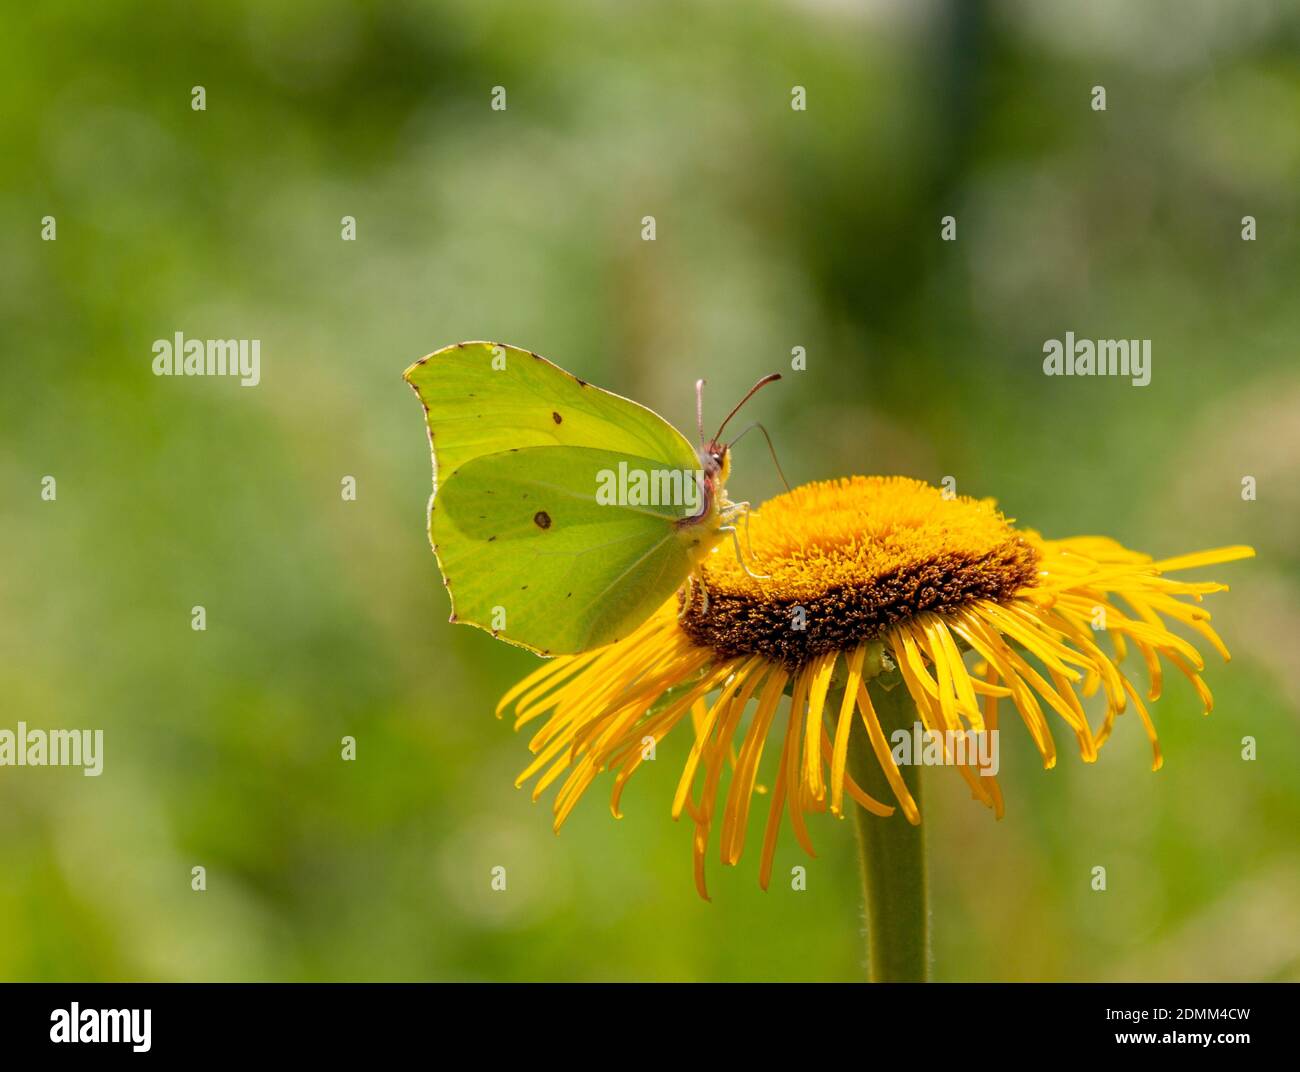 a common brimstone butterfly at a yellow flower in natural ambiance Stock Photo